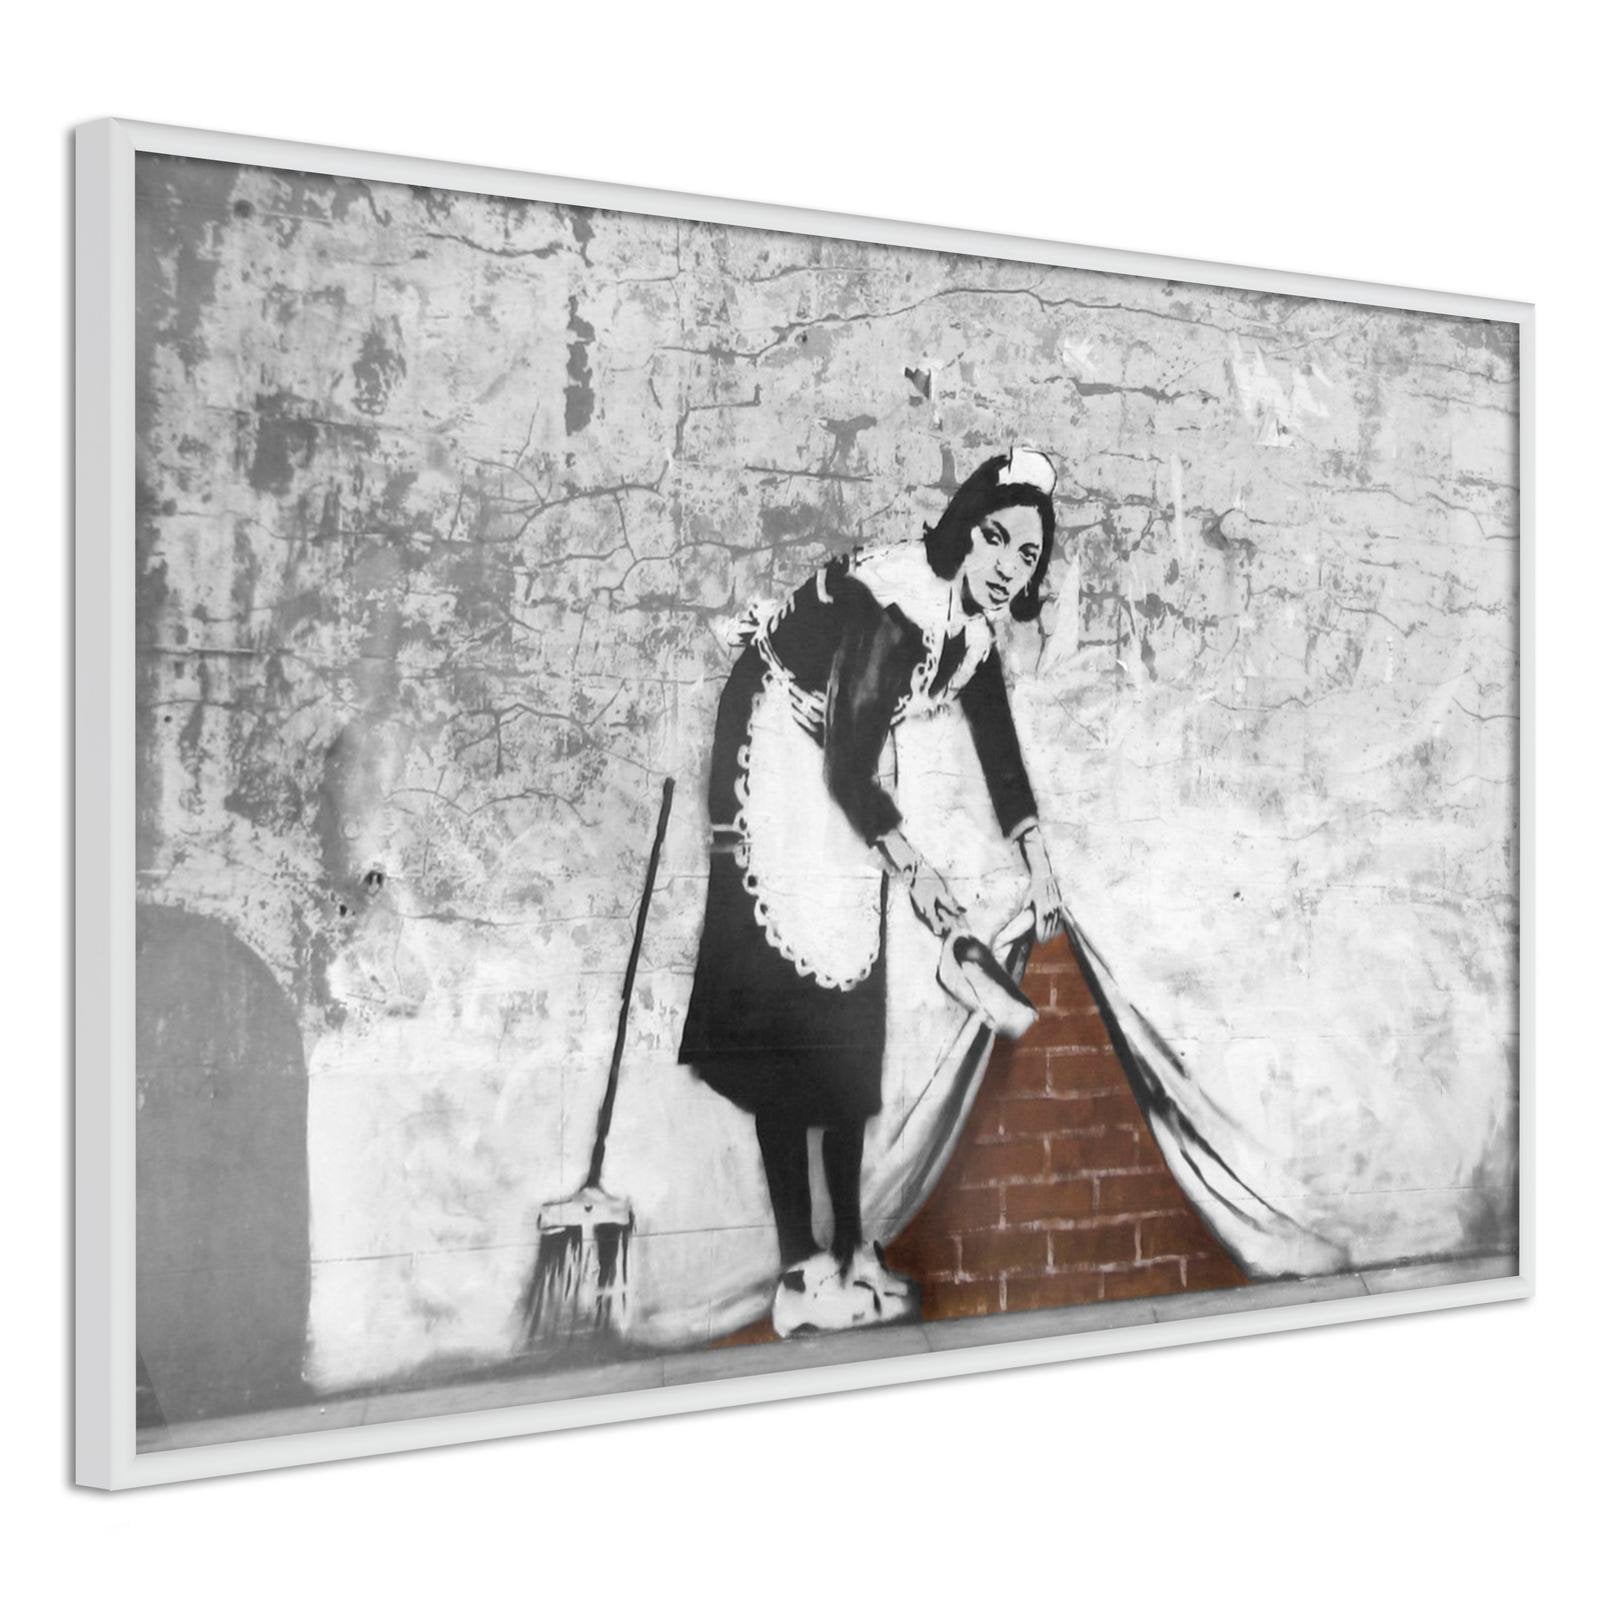 Inramad Poster / Tavla - Banksy: Sweep it Under the Carpet-Poster Inramad-Artgeist-peaceofhome.se